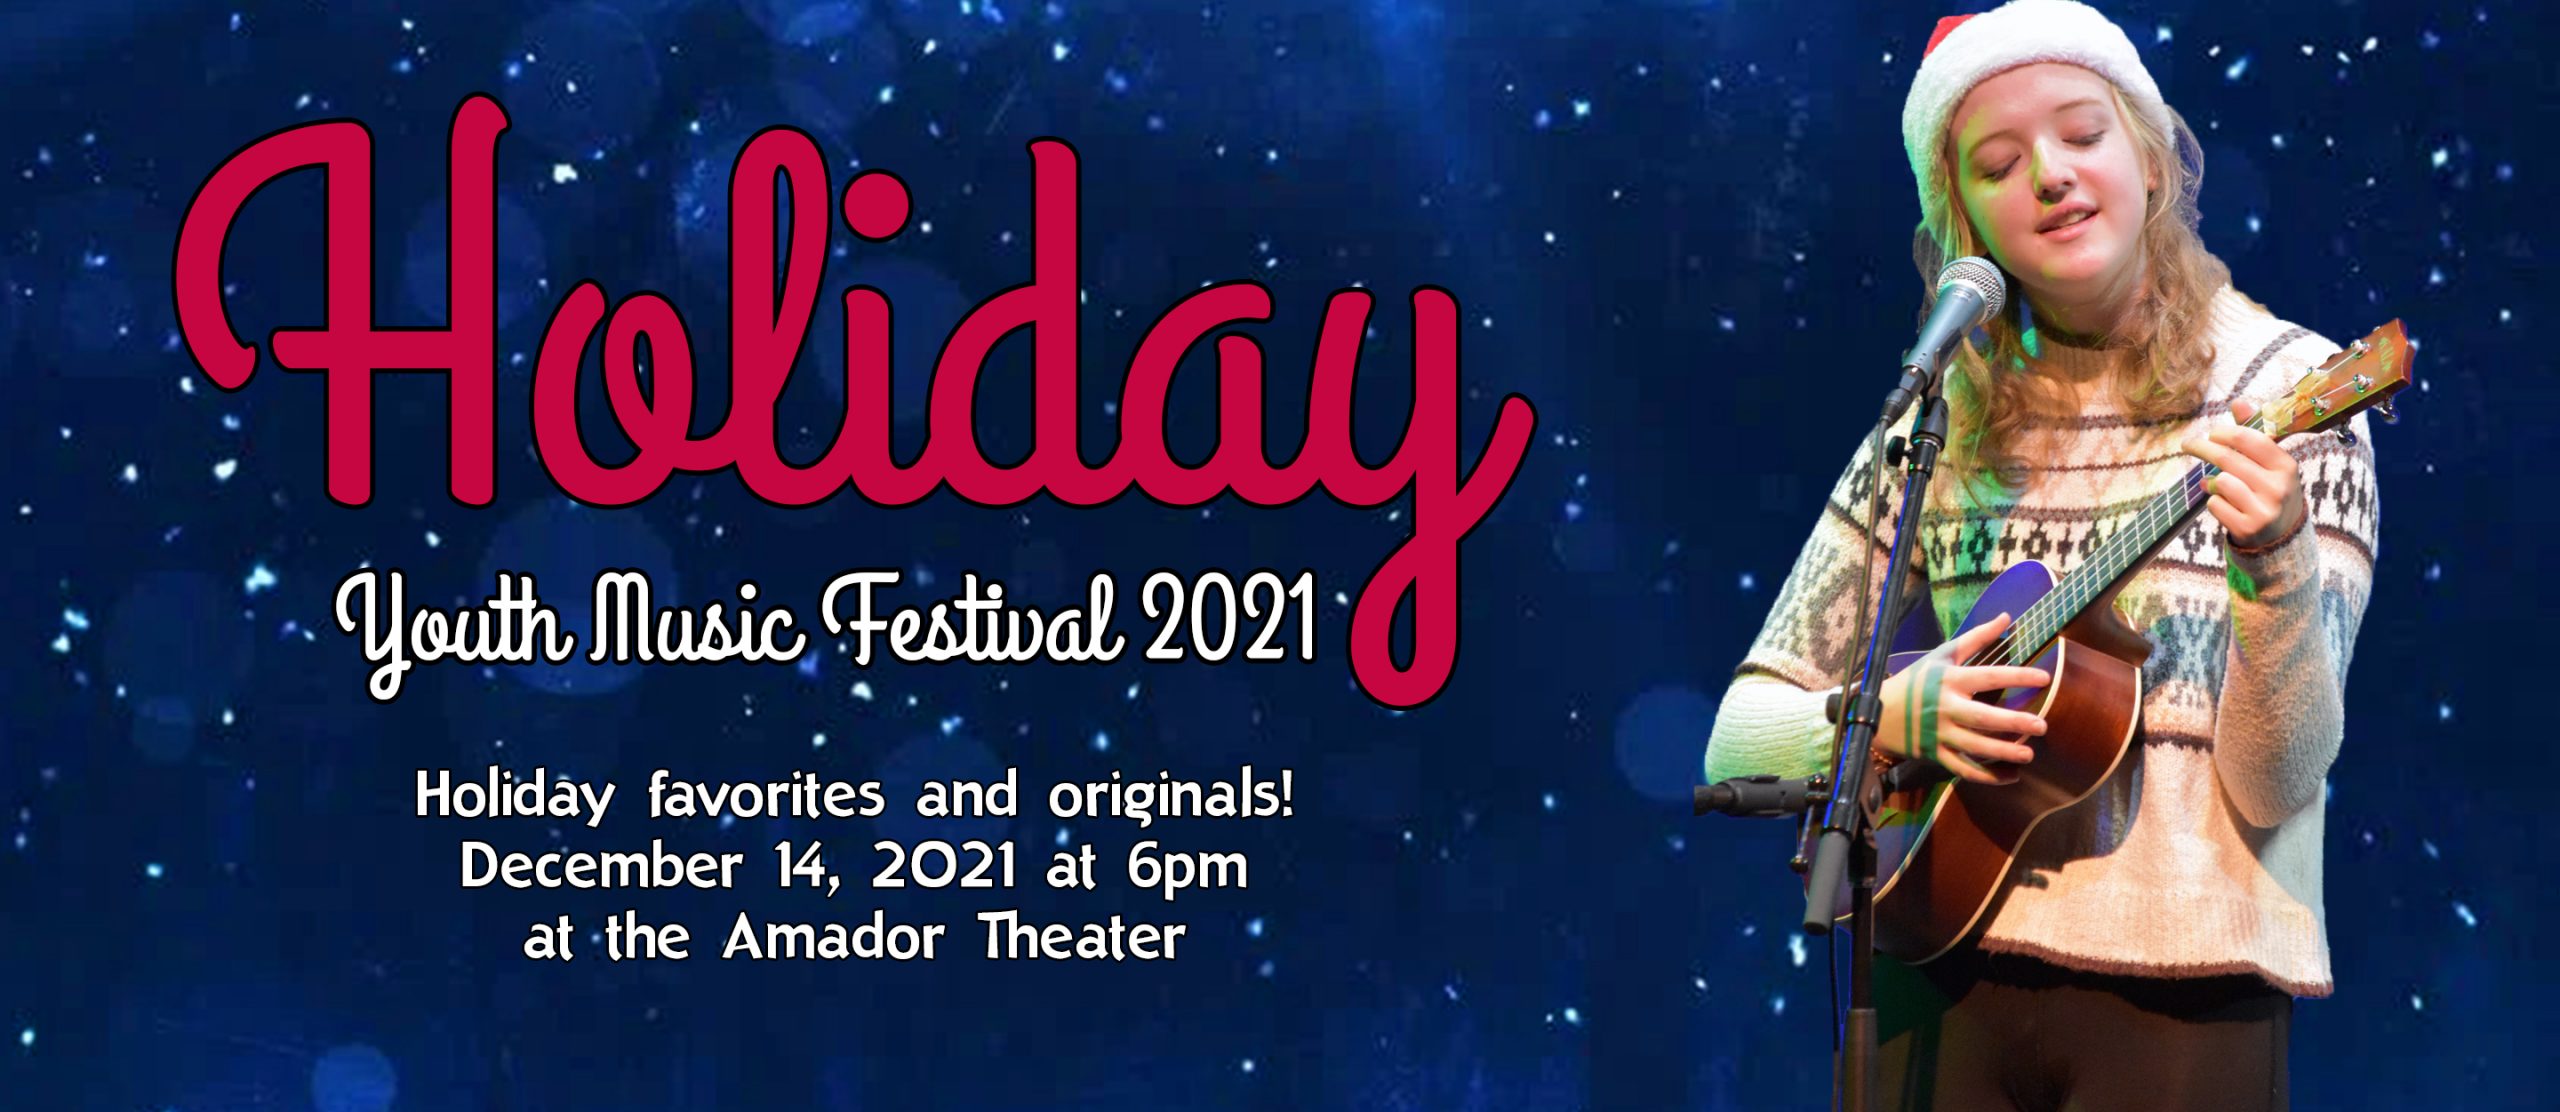 Holiday Youth Music Festival 2021